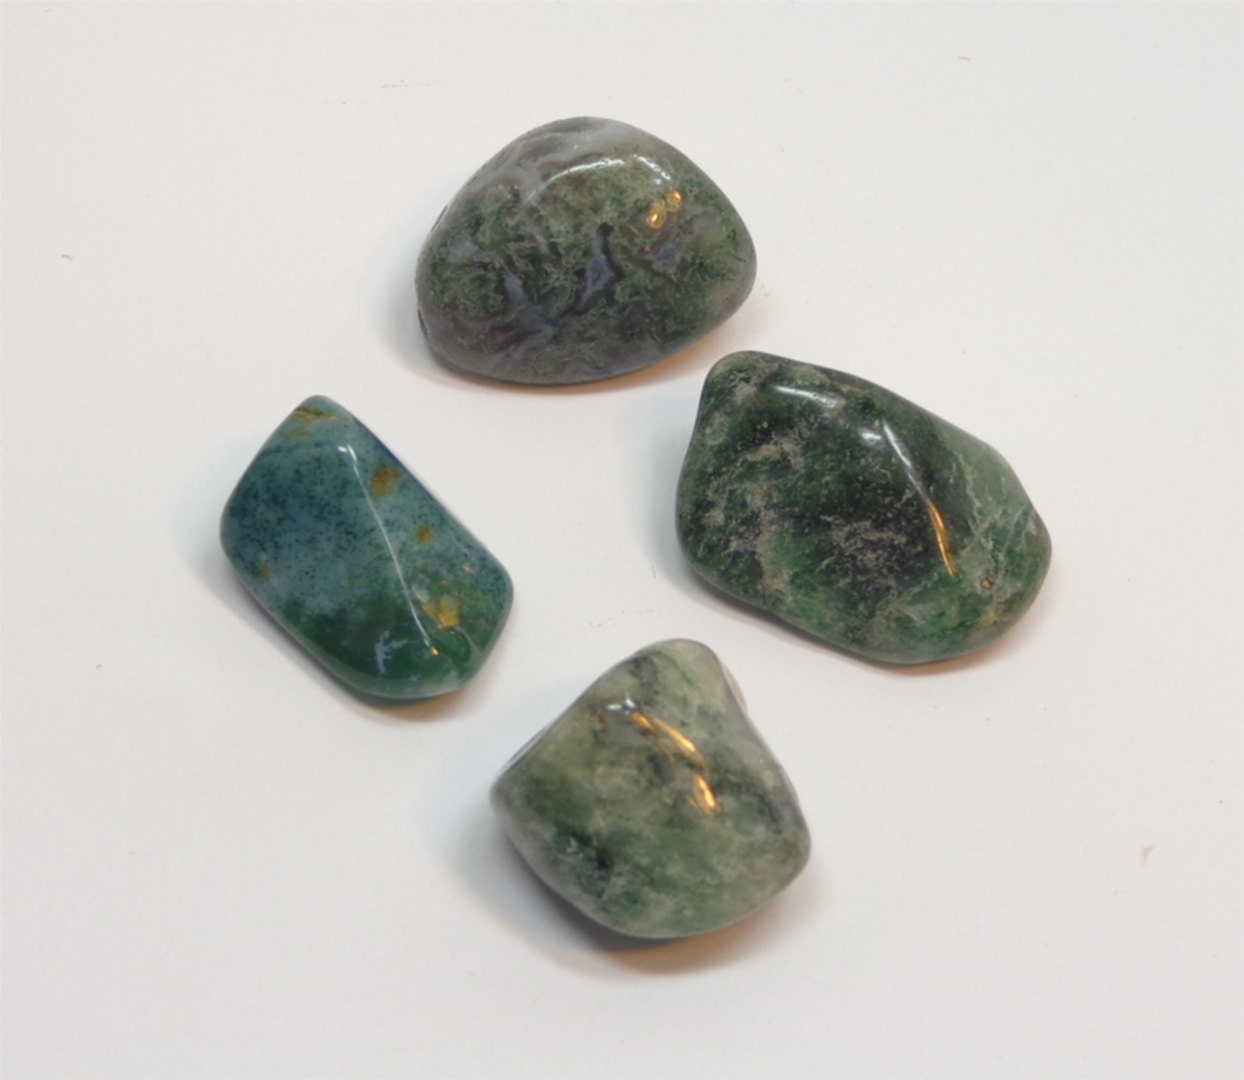 4 Green and Blue Moss Agate Tumbled Loose Gemstones for Wire